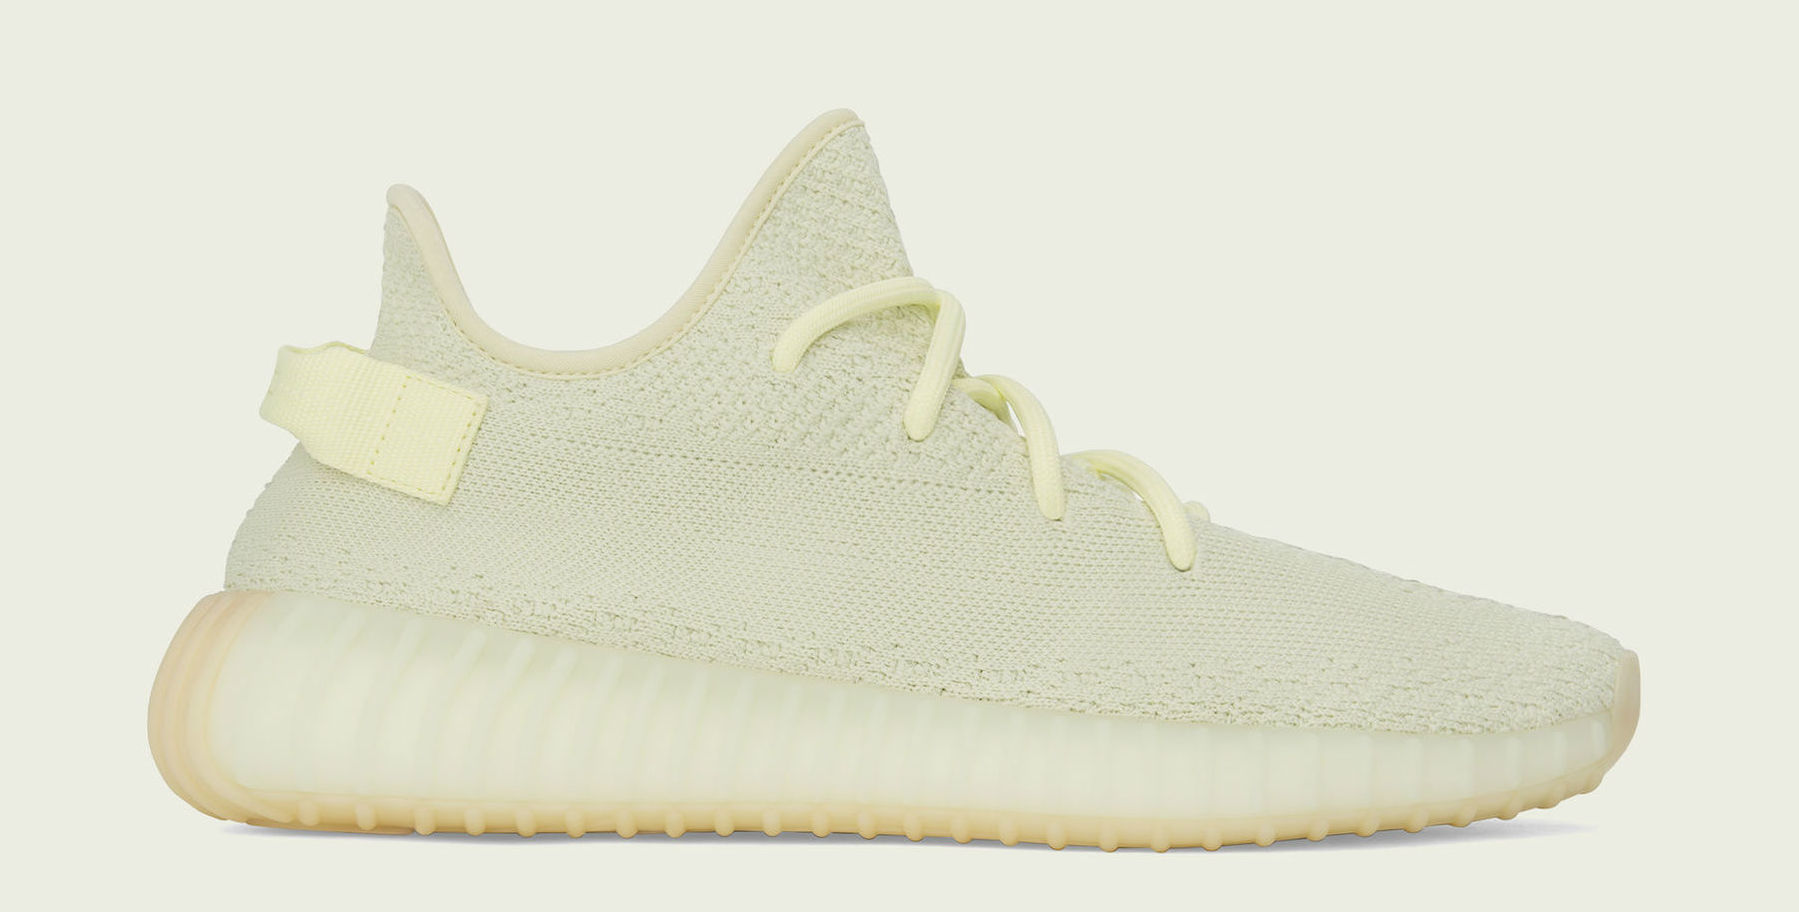 Adidas Yeezy Boost 350 V2 Butter Release Date F36980